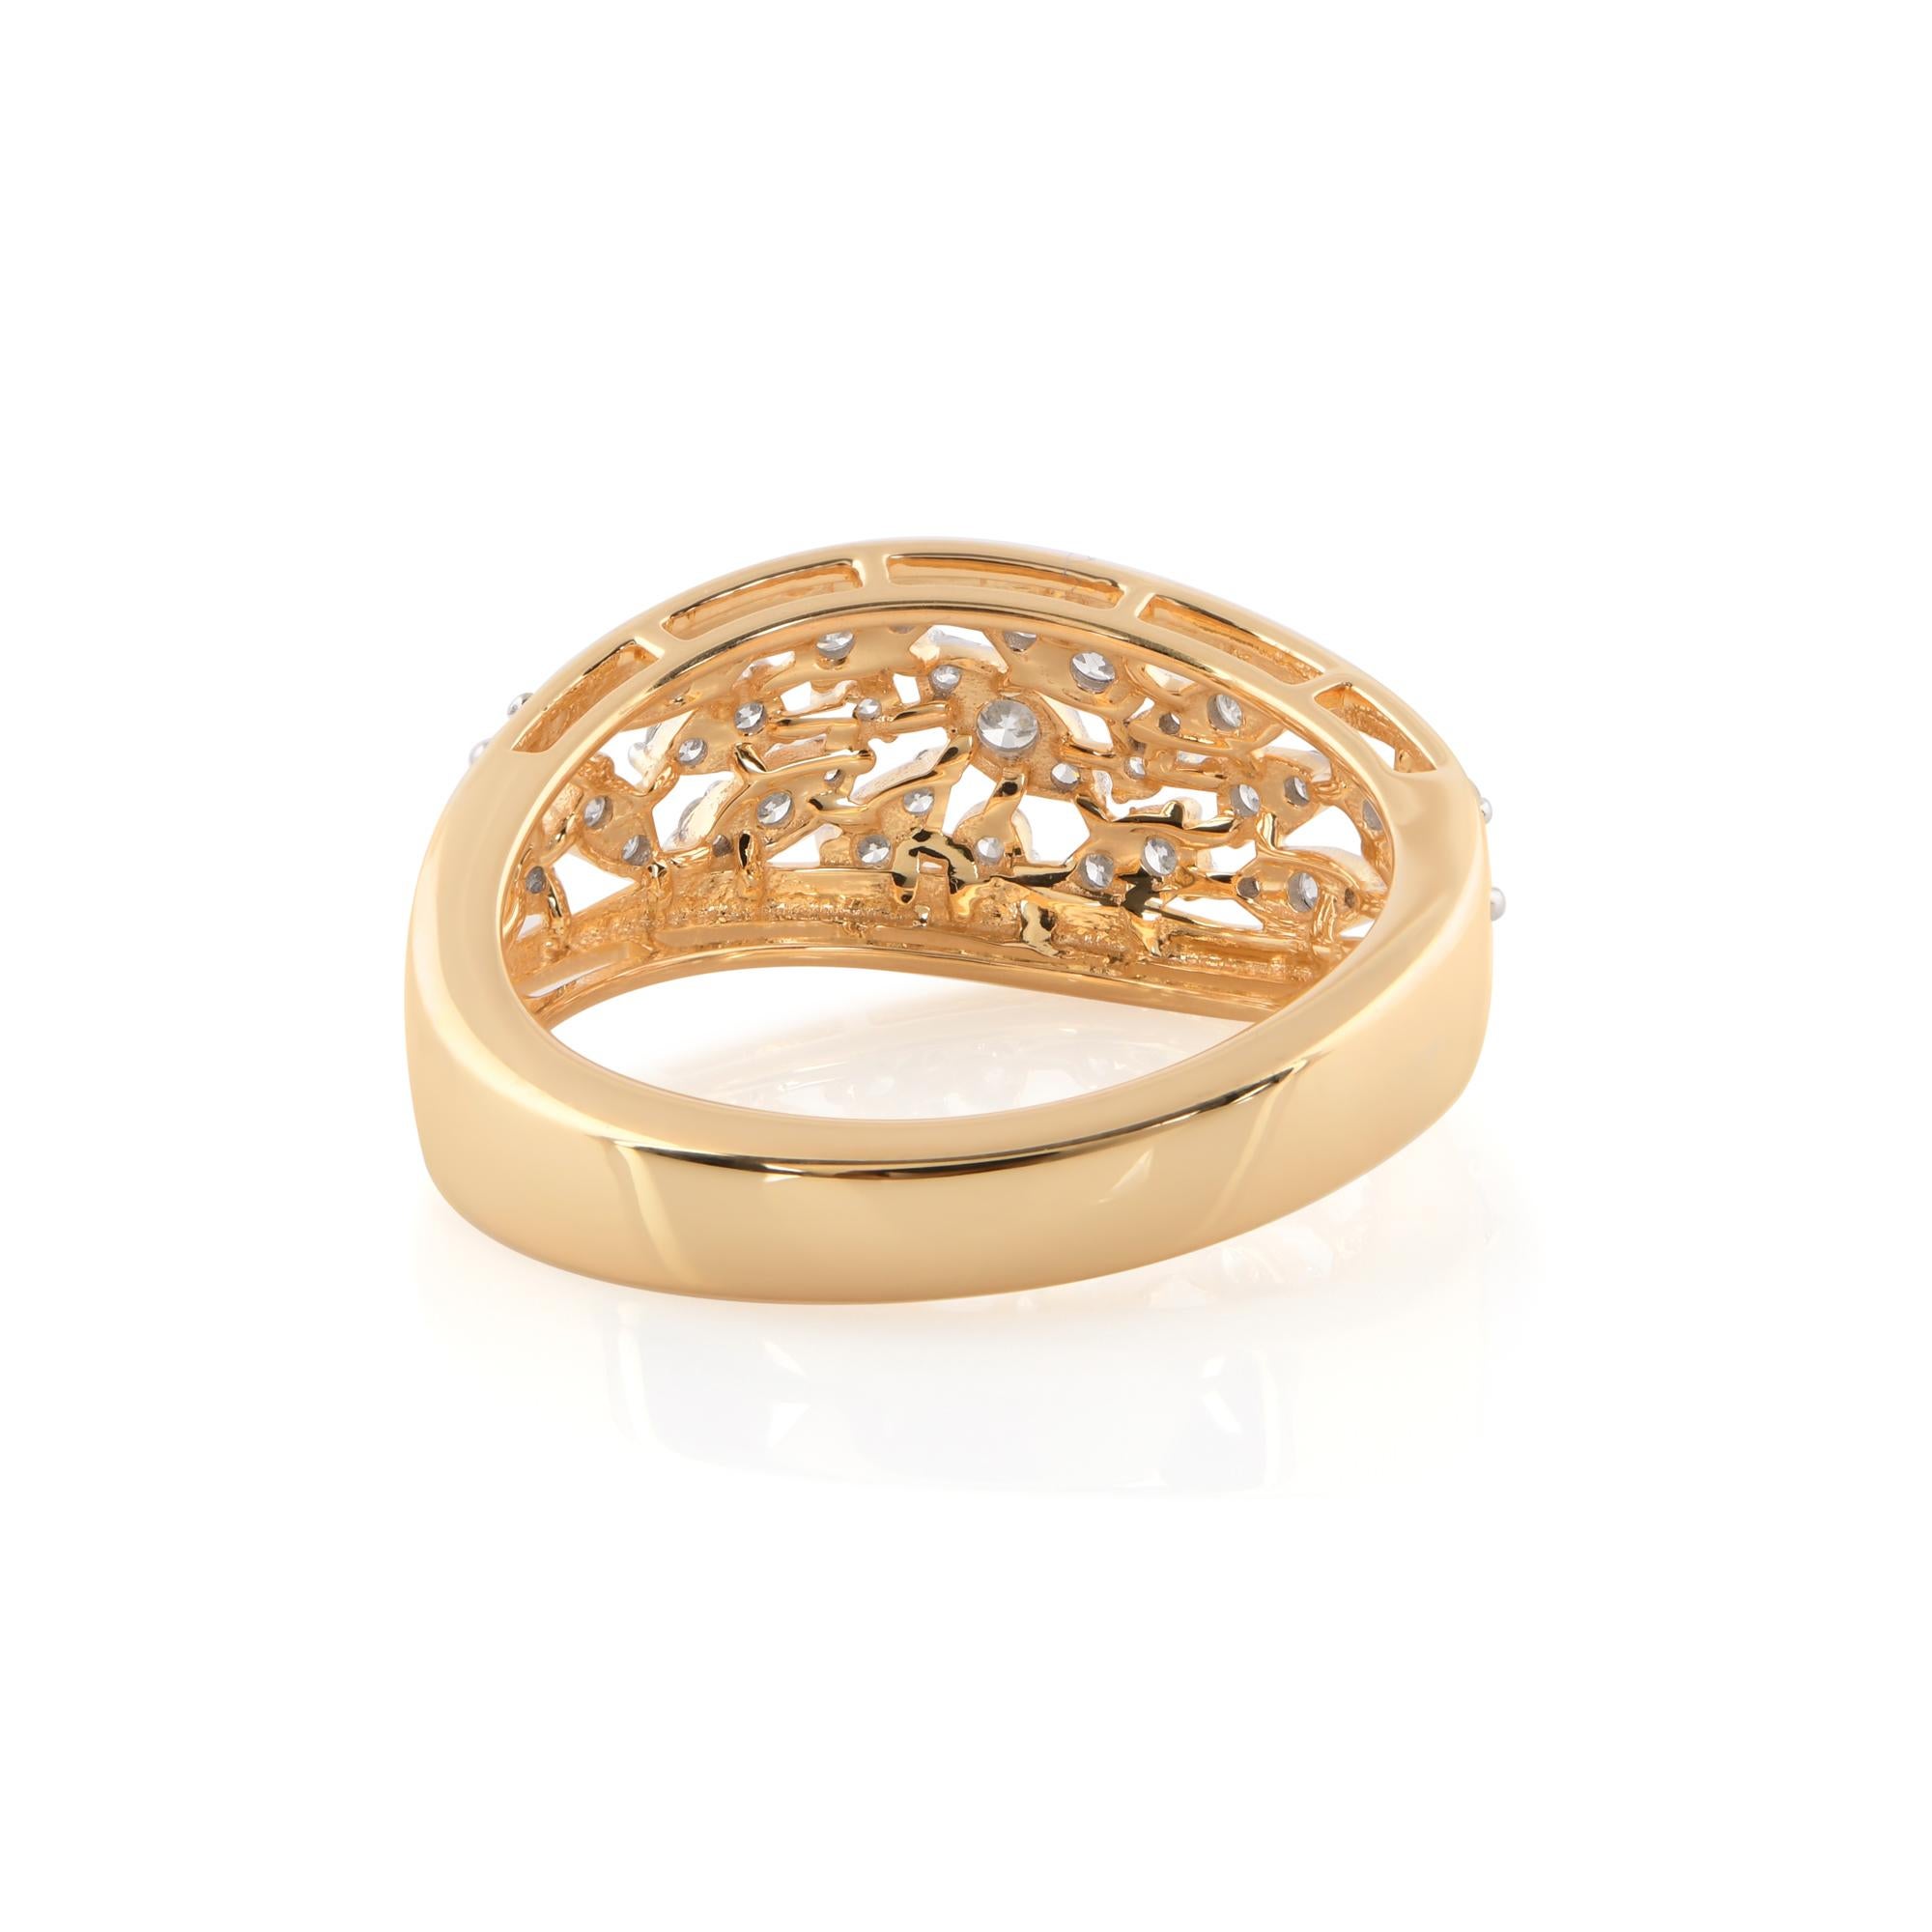 The diamond is securely set within a beautifully crafted 14 Karat Yellow Gold setting, adding warmth and richness to the design. The lustrous gold band showcases intricate detailing, adding an extra layer of sophistication to the piece. The smooth,